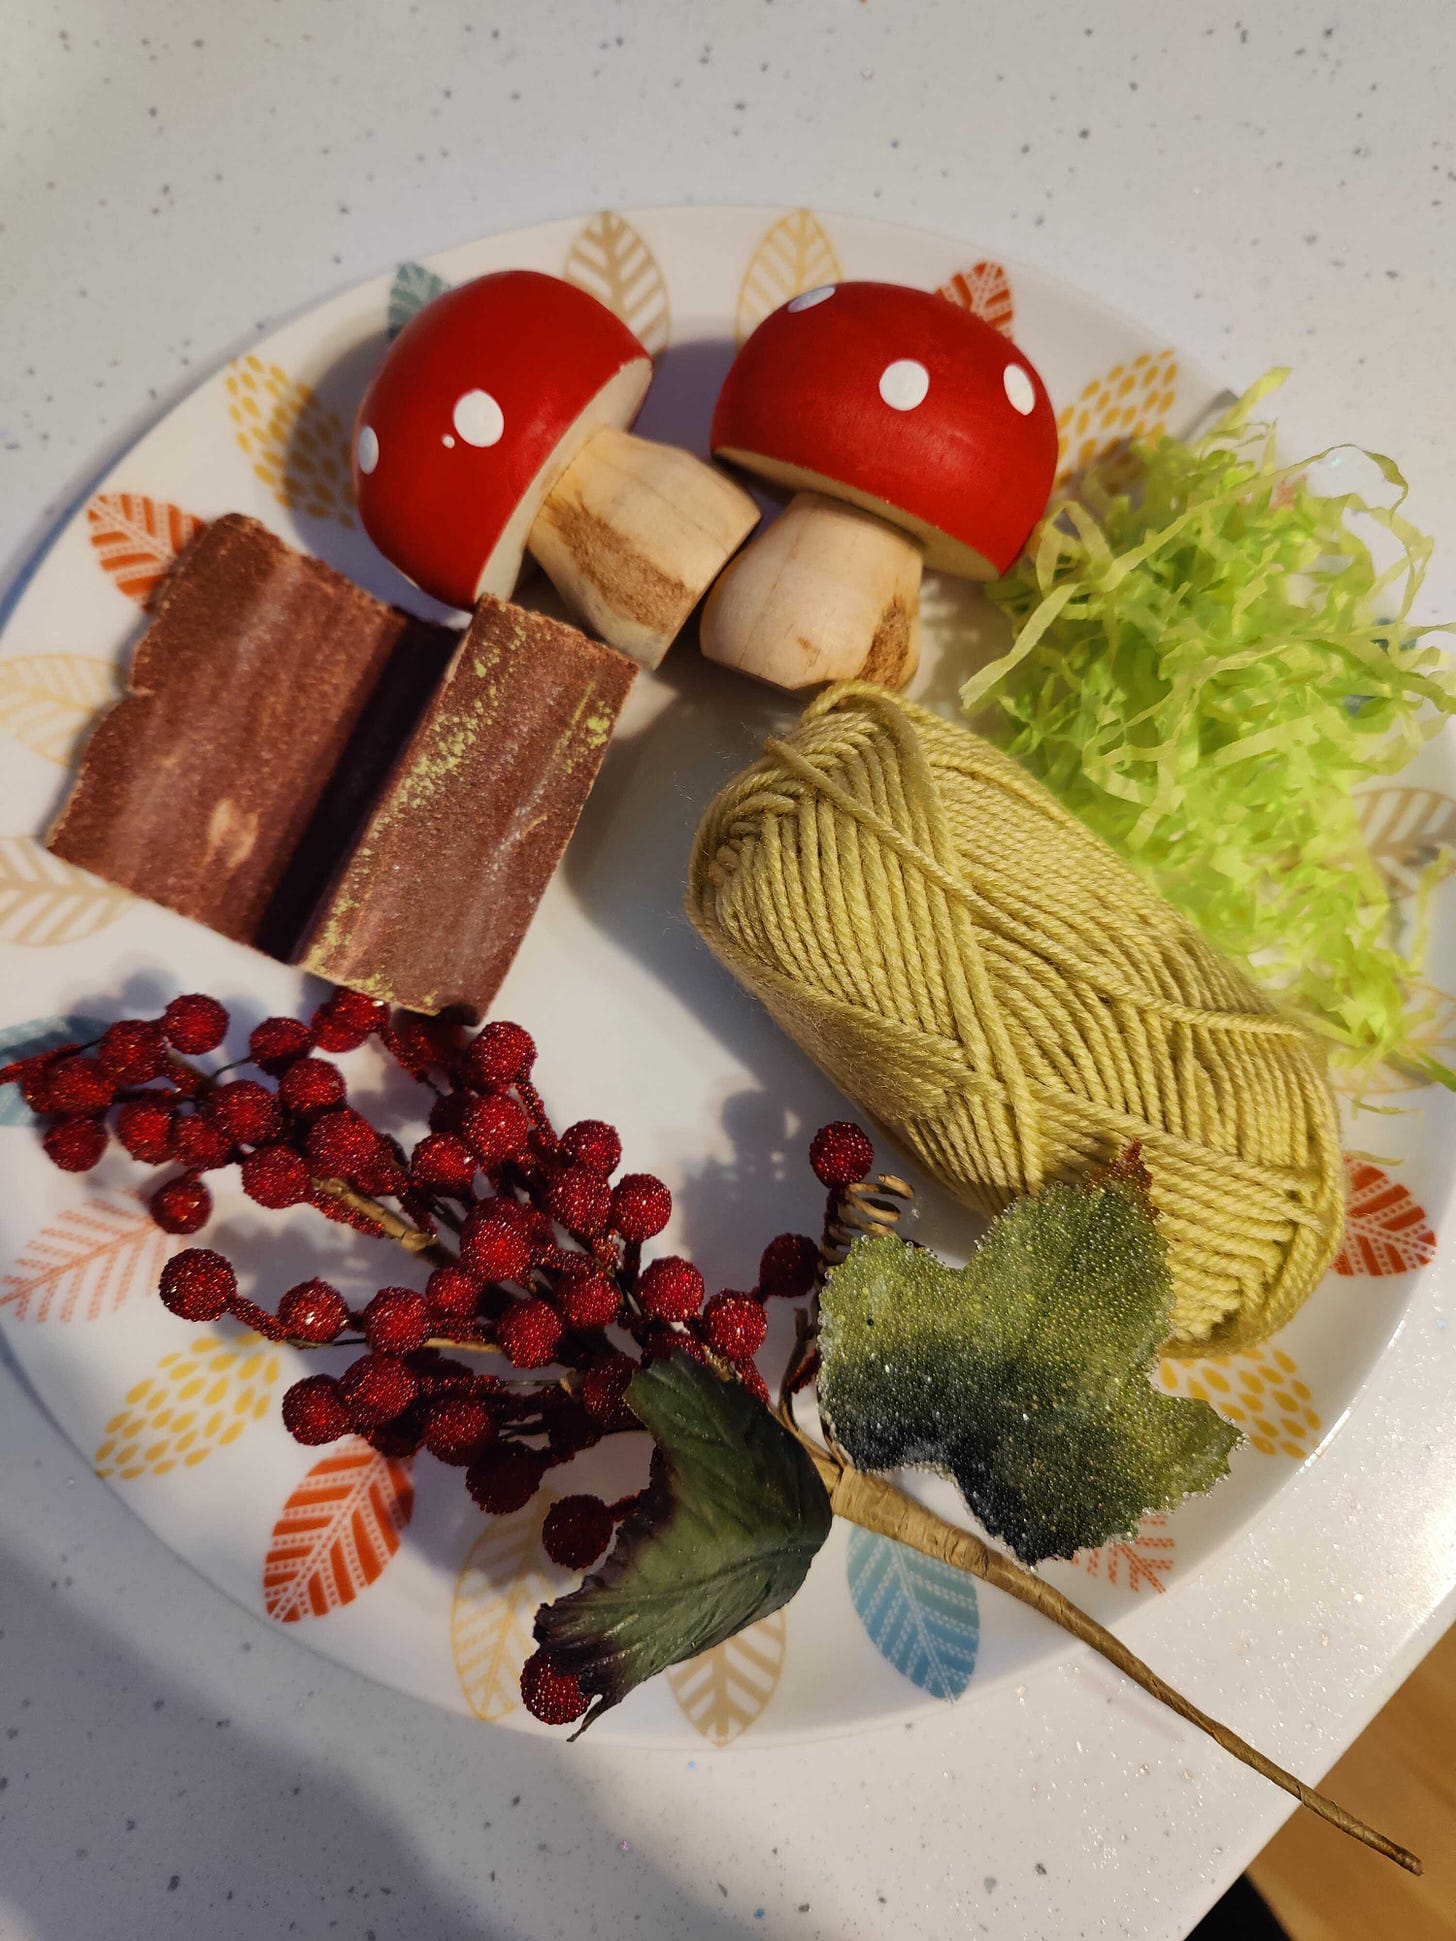 The image is a plate filled with objects found around the house that look like real food. It includes wood mushroom, brown sandpaper, berries, a ball of knitting yearn and some green paper